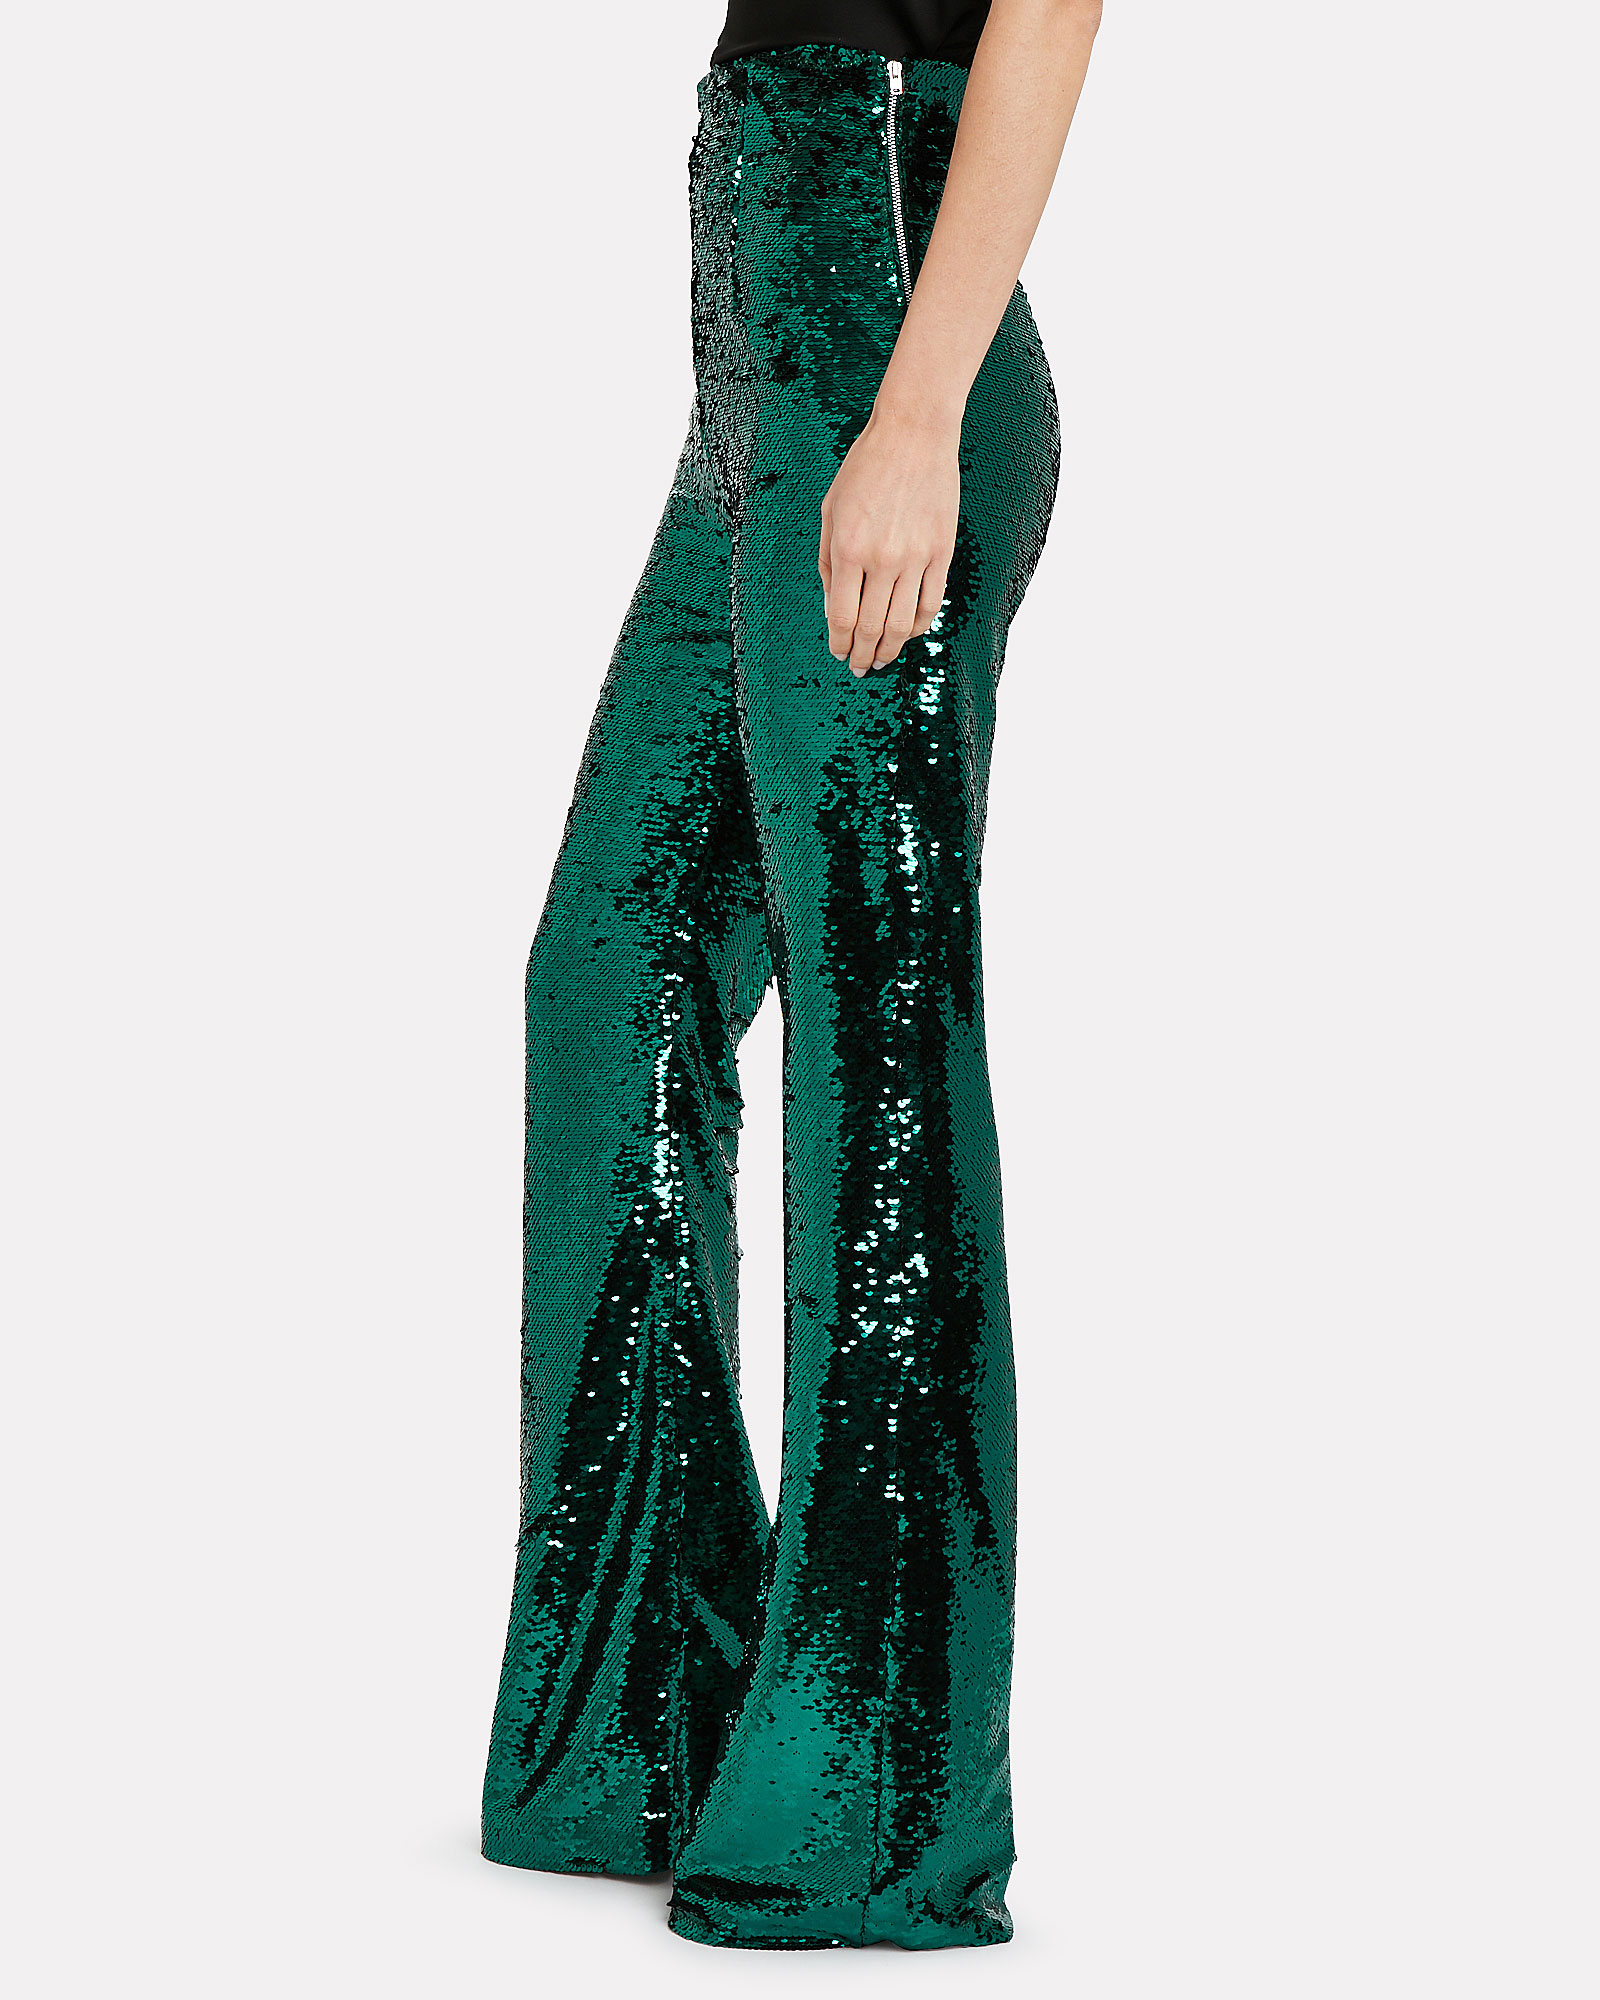 16ARLINGTON Newman Flared Sequin-Embellished Trousers in green b ...